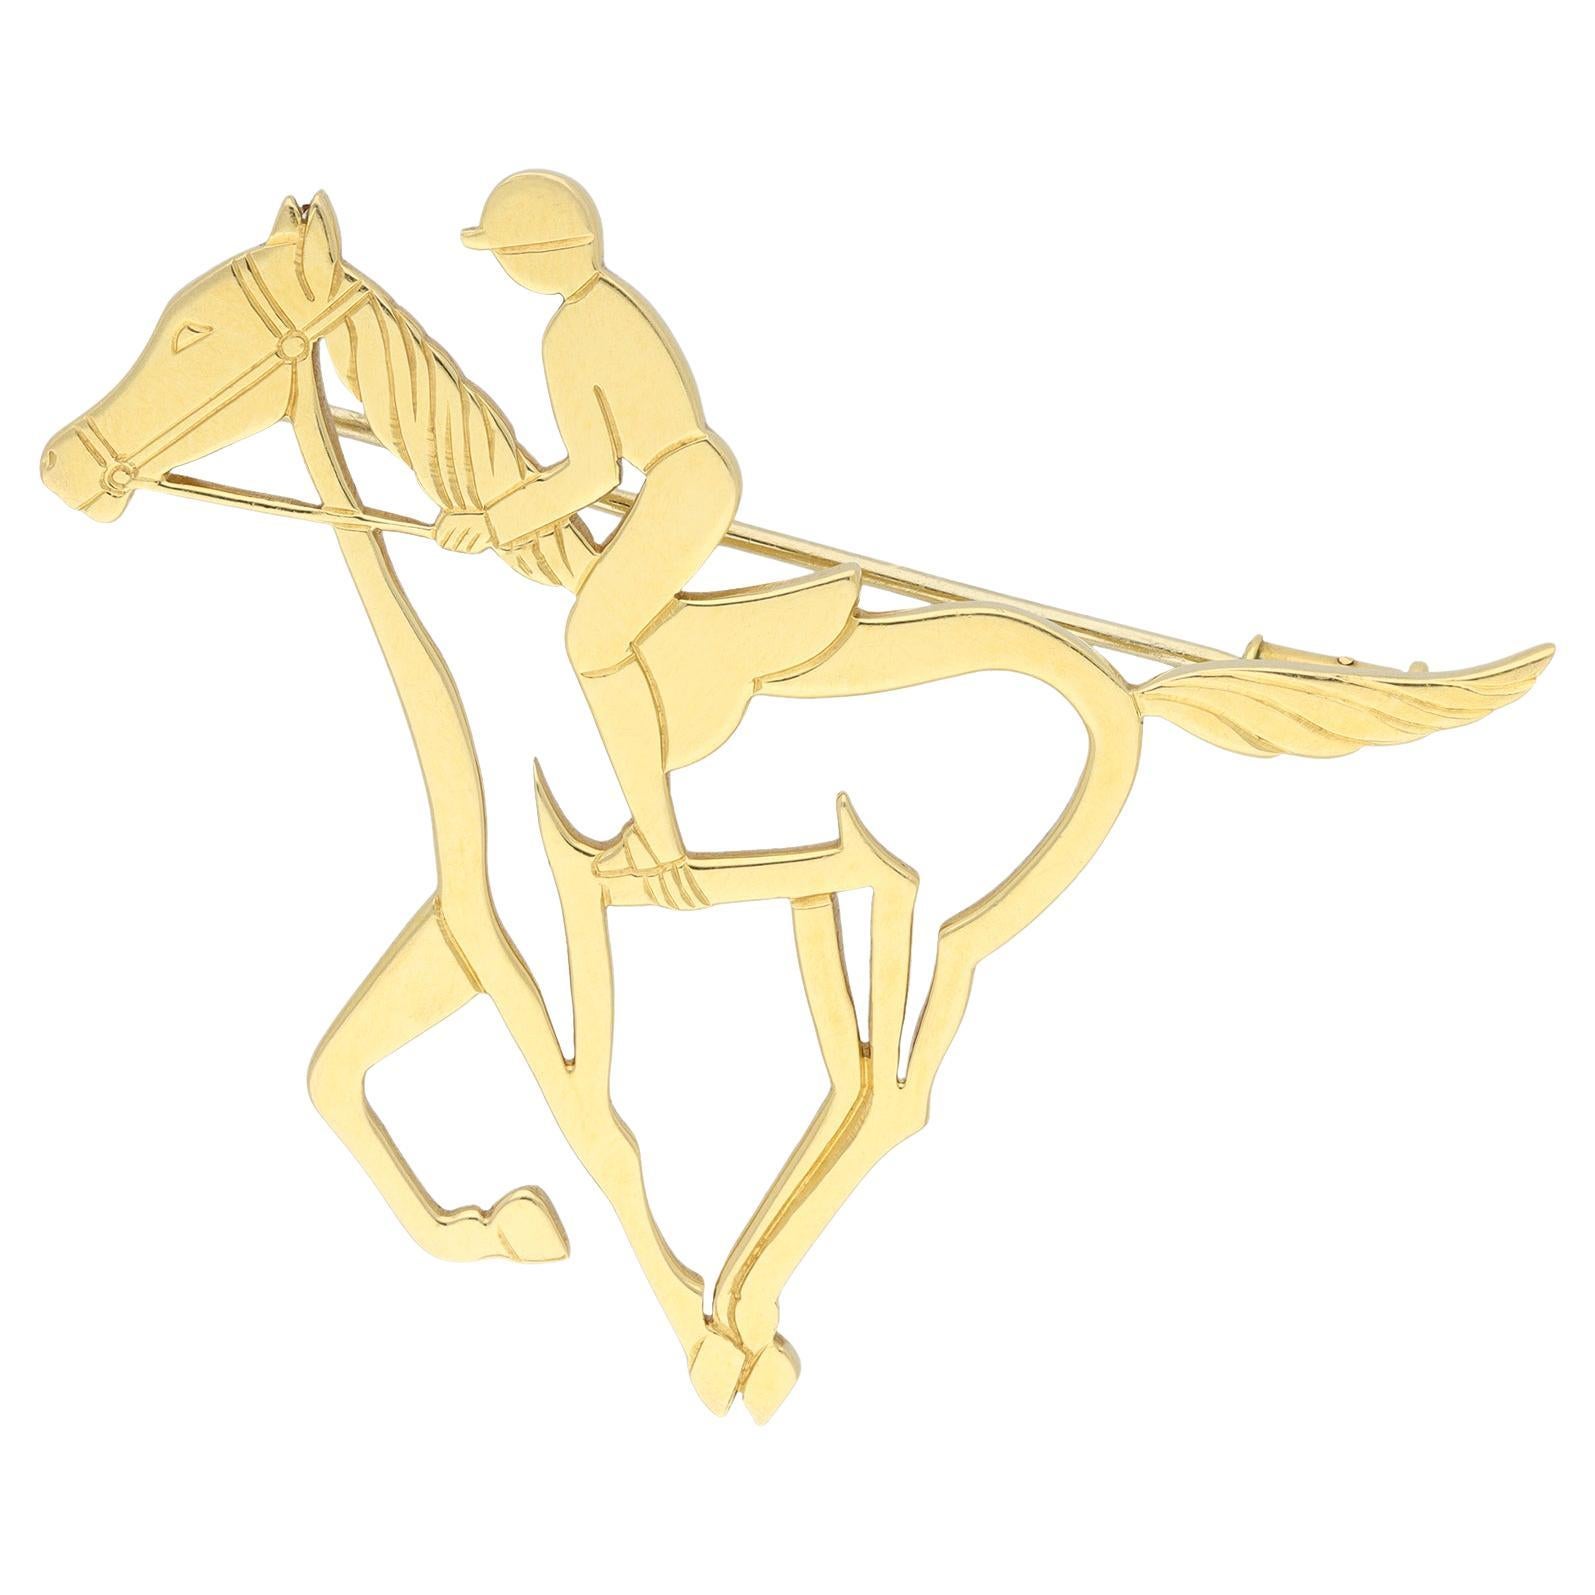 André Vassort gold horse brooch, French, circa 1970.